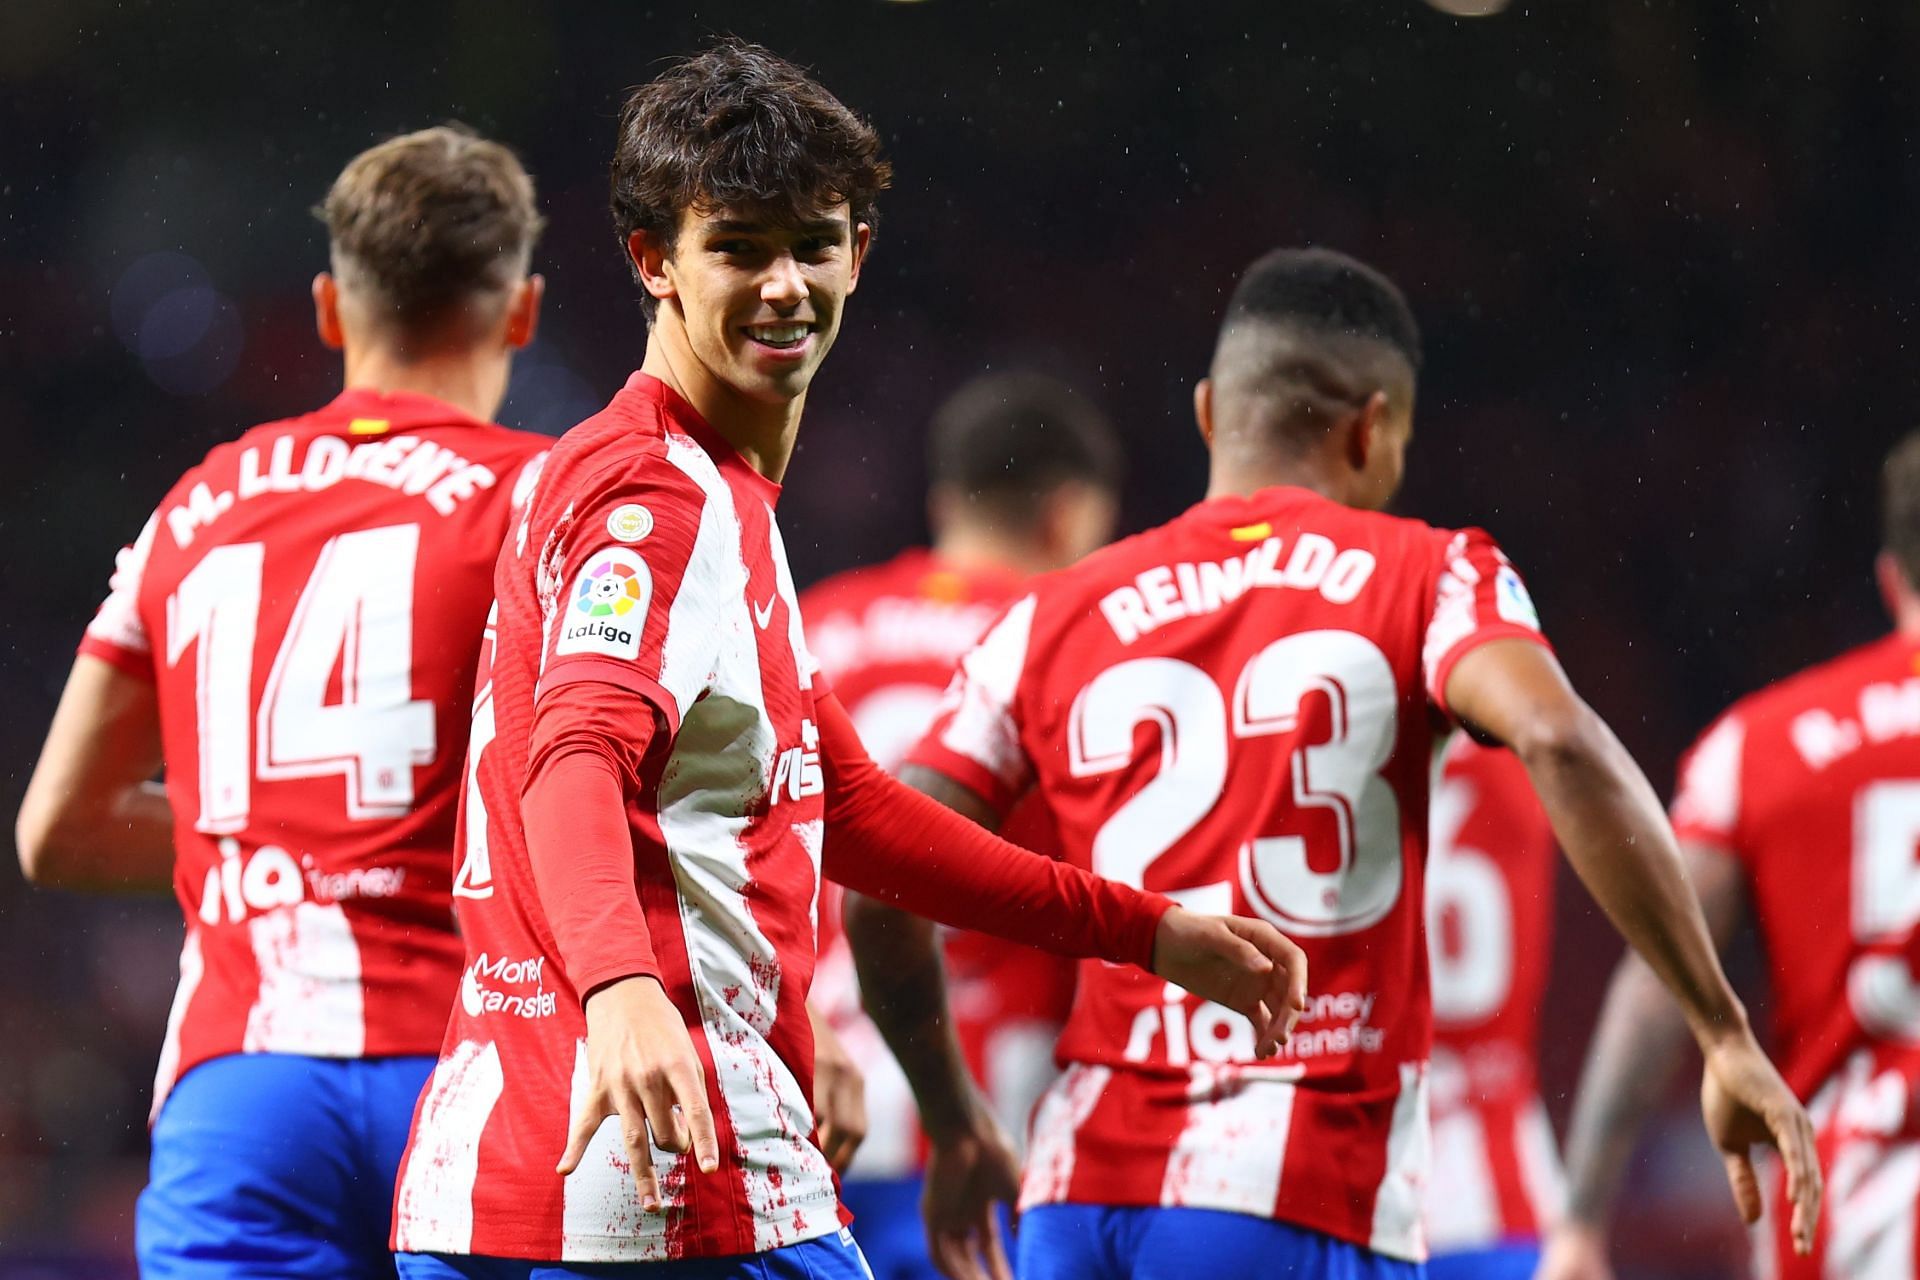 Atletico Madrid are in fine form ahead of the Manchester United clash